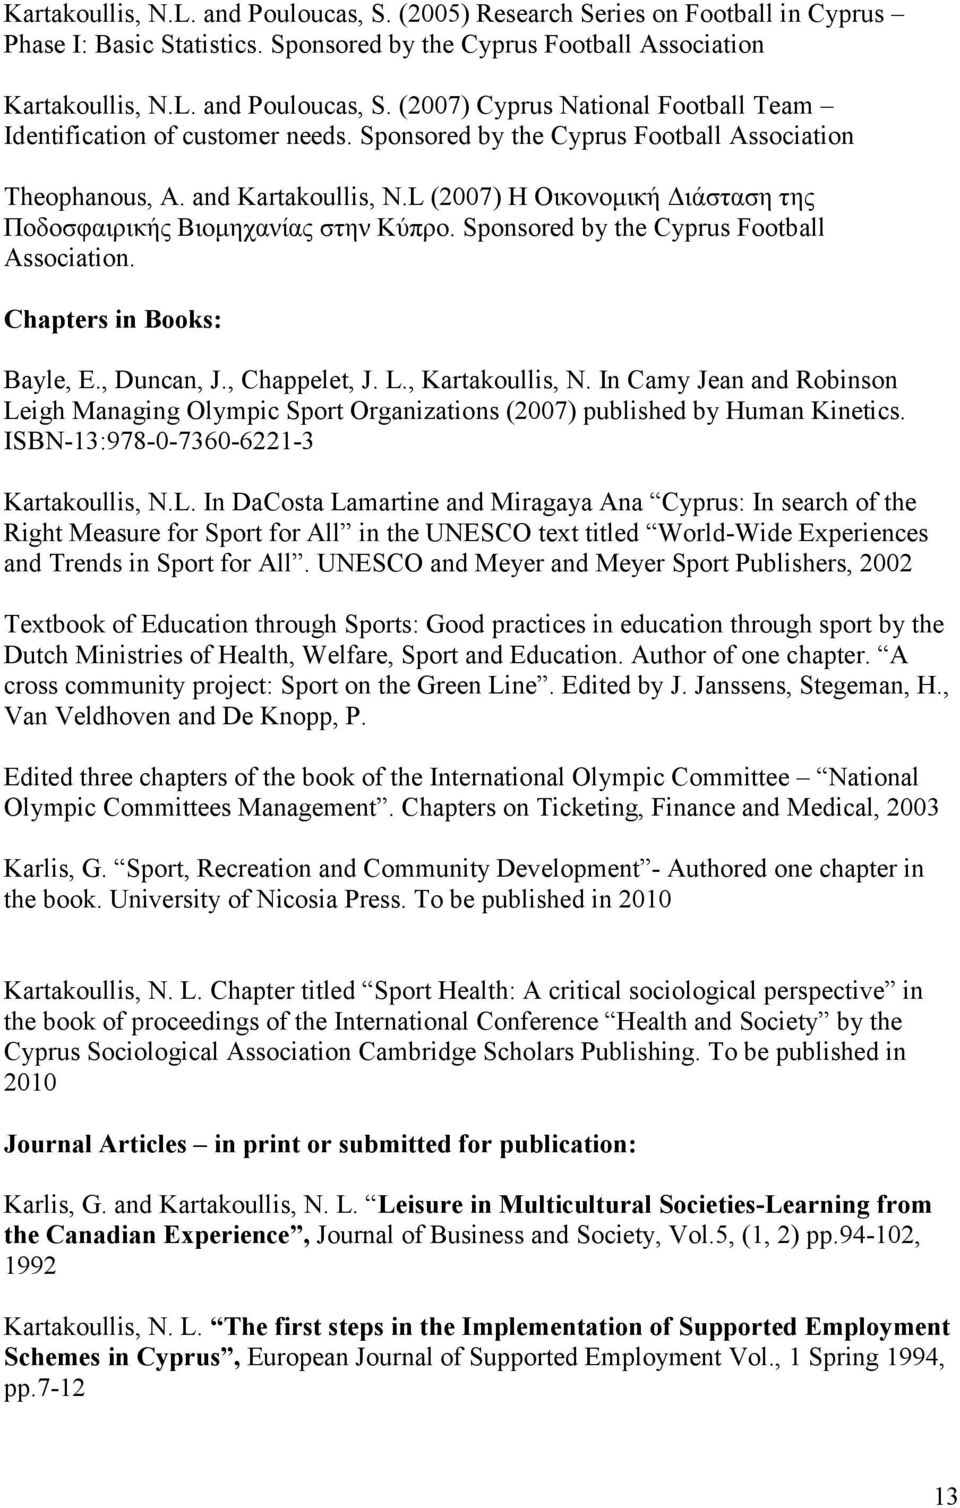 Chapters in Books: Bayle, E., Duncan, J., Chappelet, J. L., Kartakoullis, N. In Camy Jean and Robinson Leigh Managing Olympic Sport Organizations (2007) published by Human Kinetics.